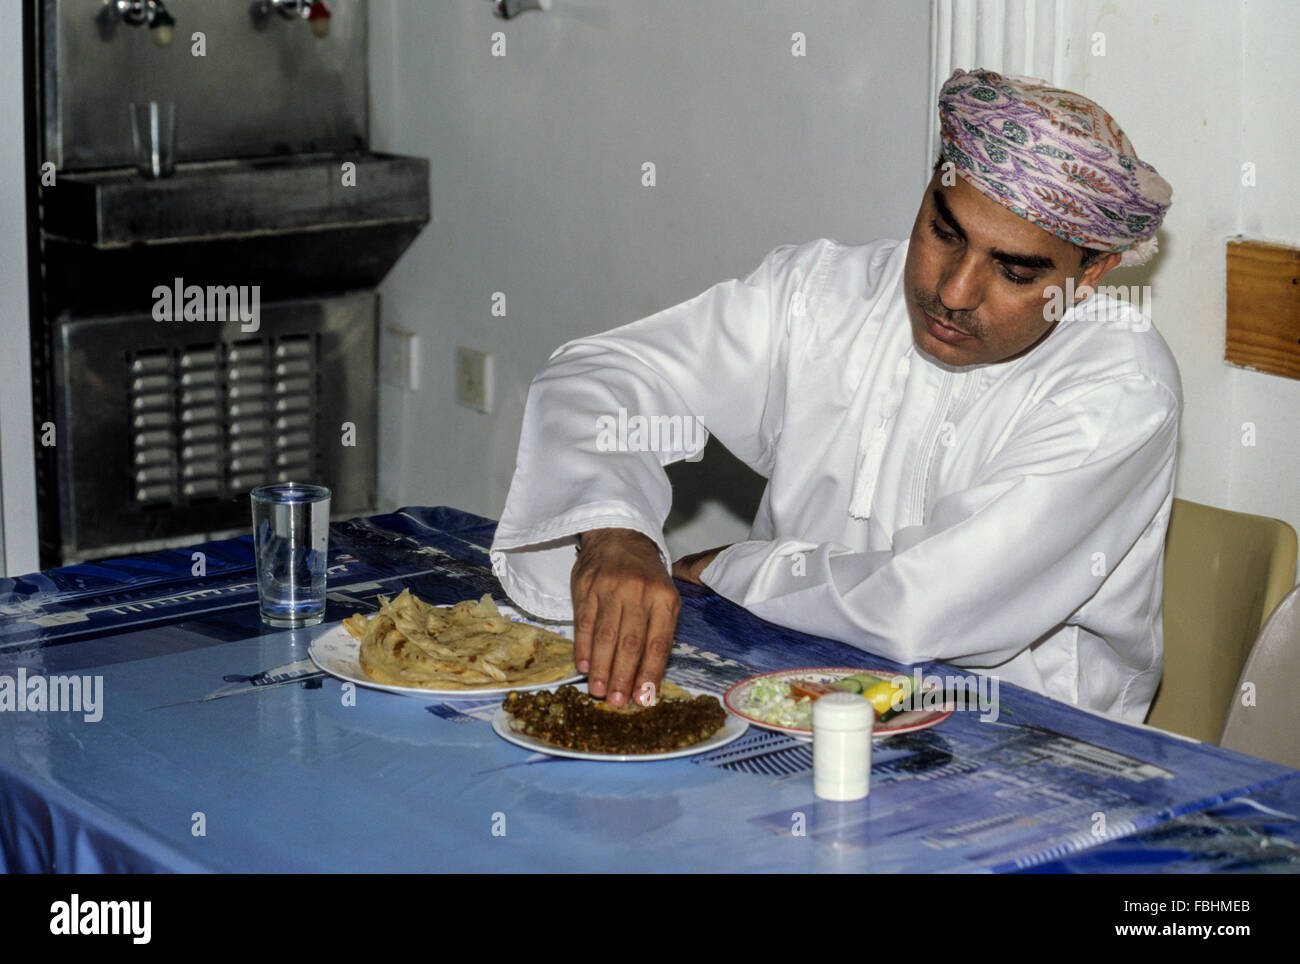 Nakhal, Oman.  Omani Eating Keema (meat, peas, beans) with his Hand. Stock Photo